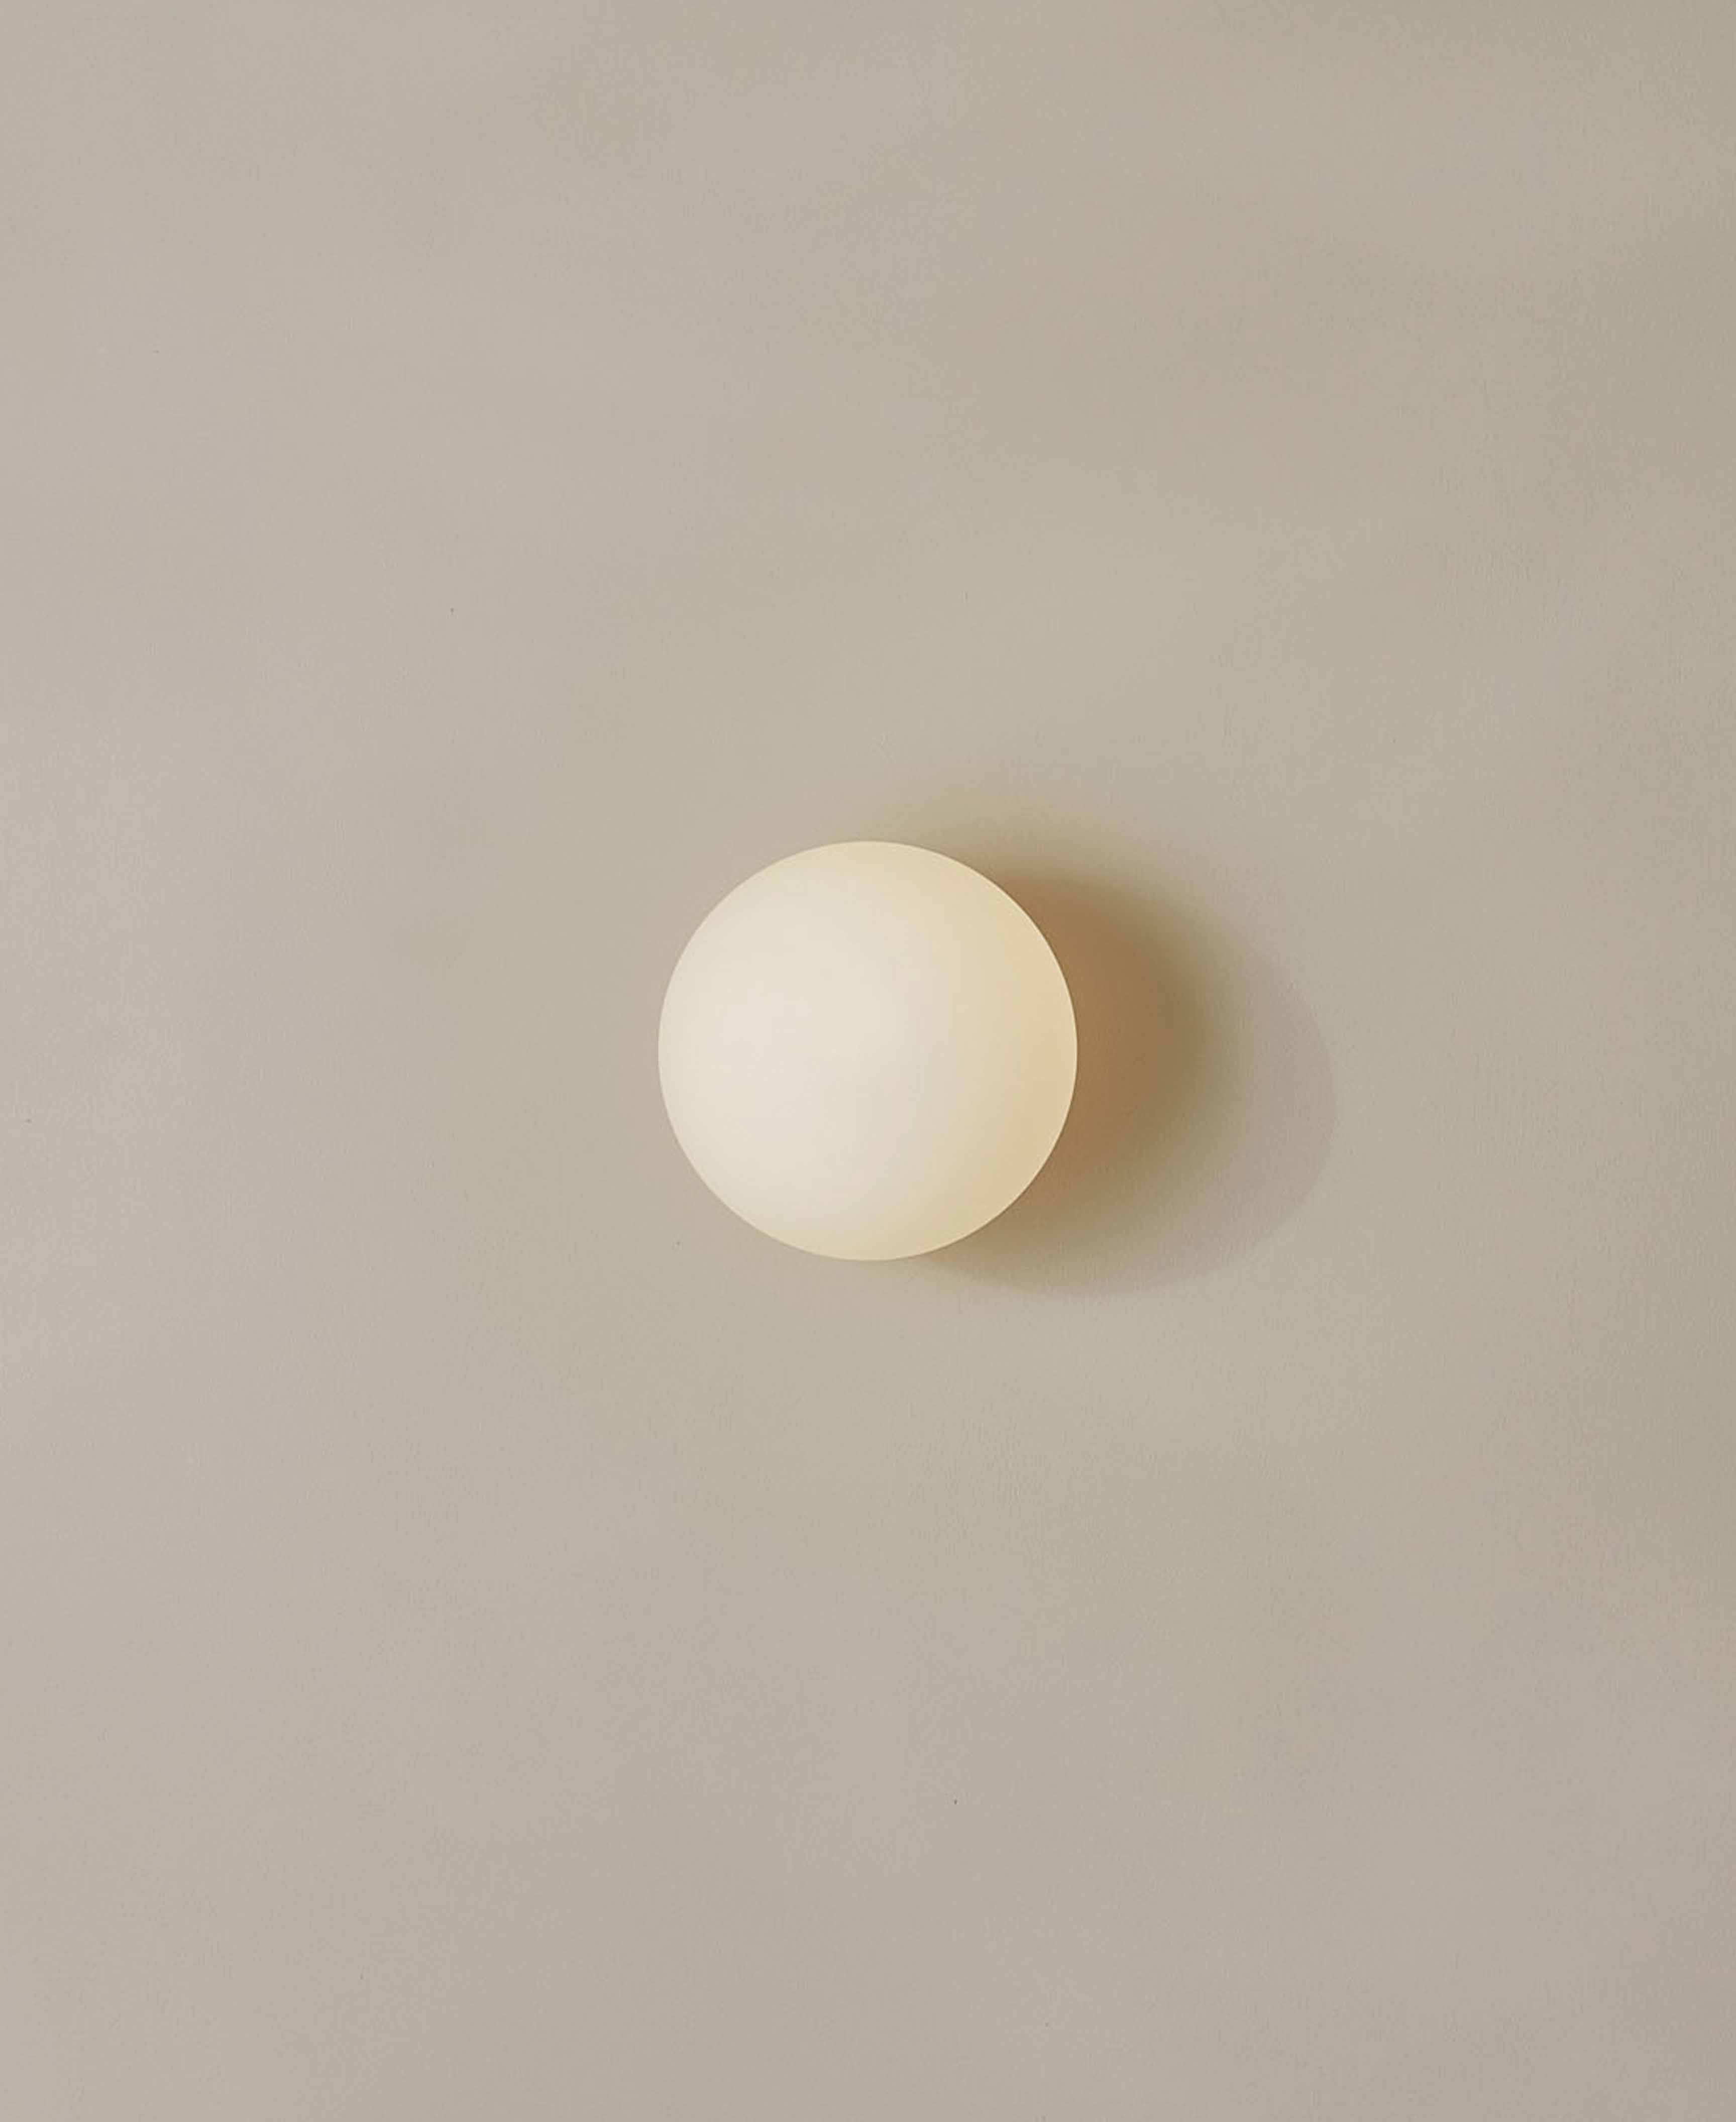 Marz Designs Orb Surface Sconce, Large in White Frosted.